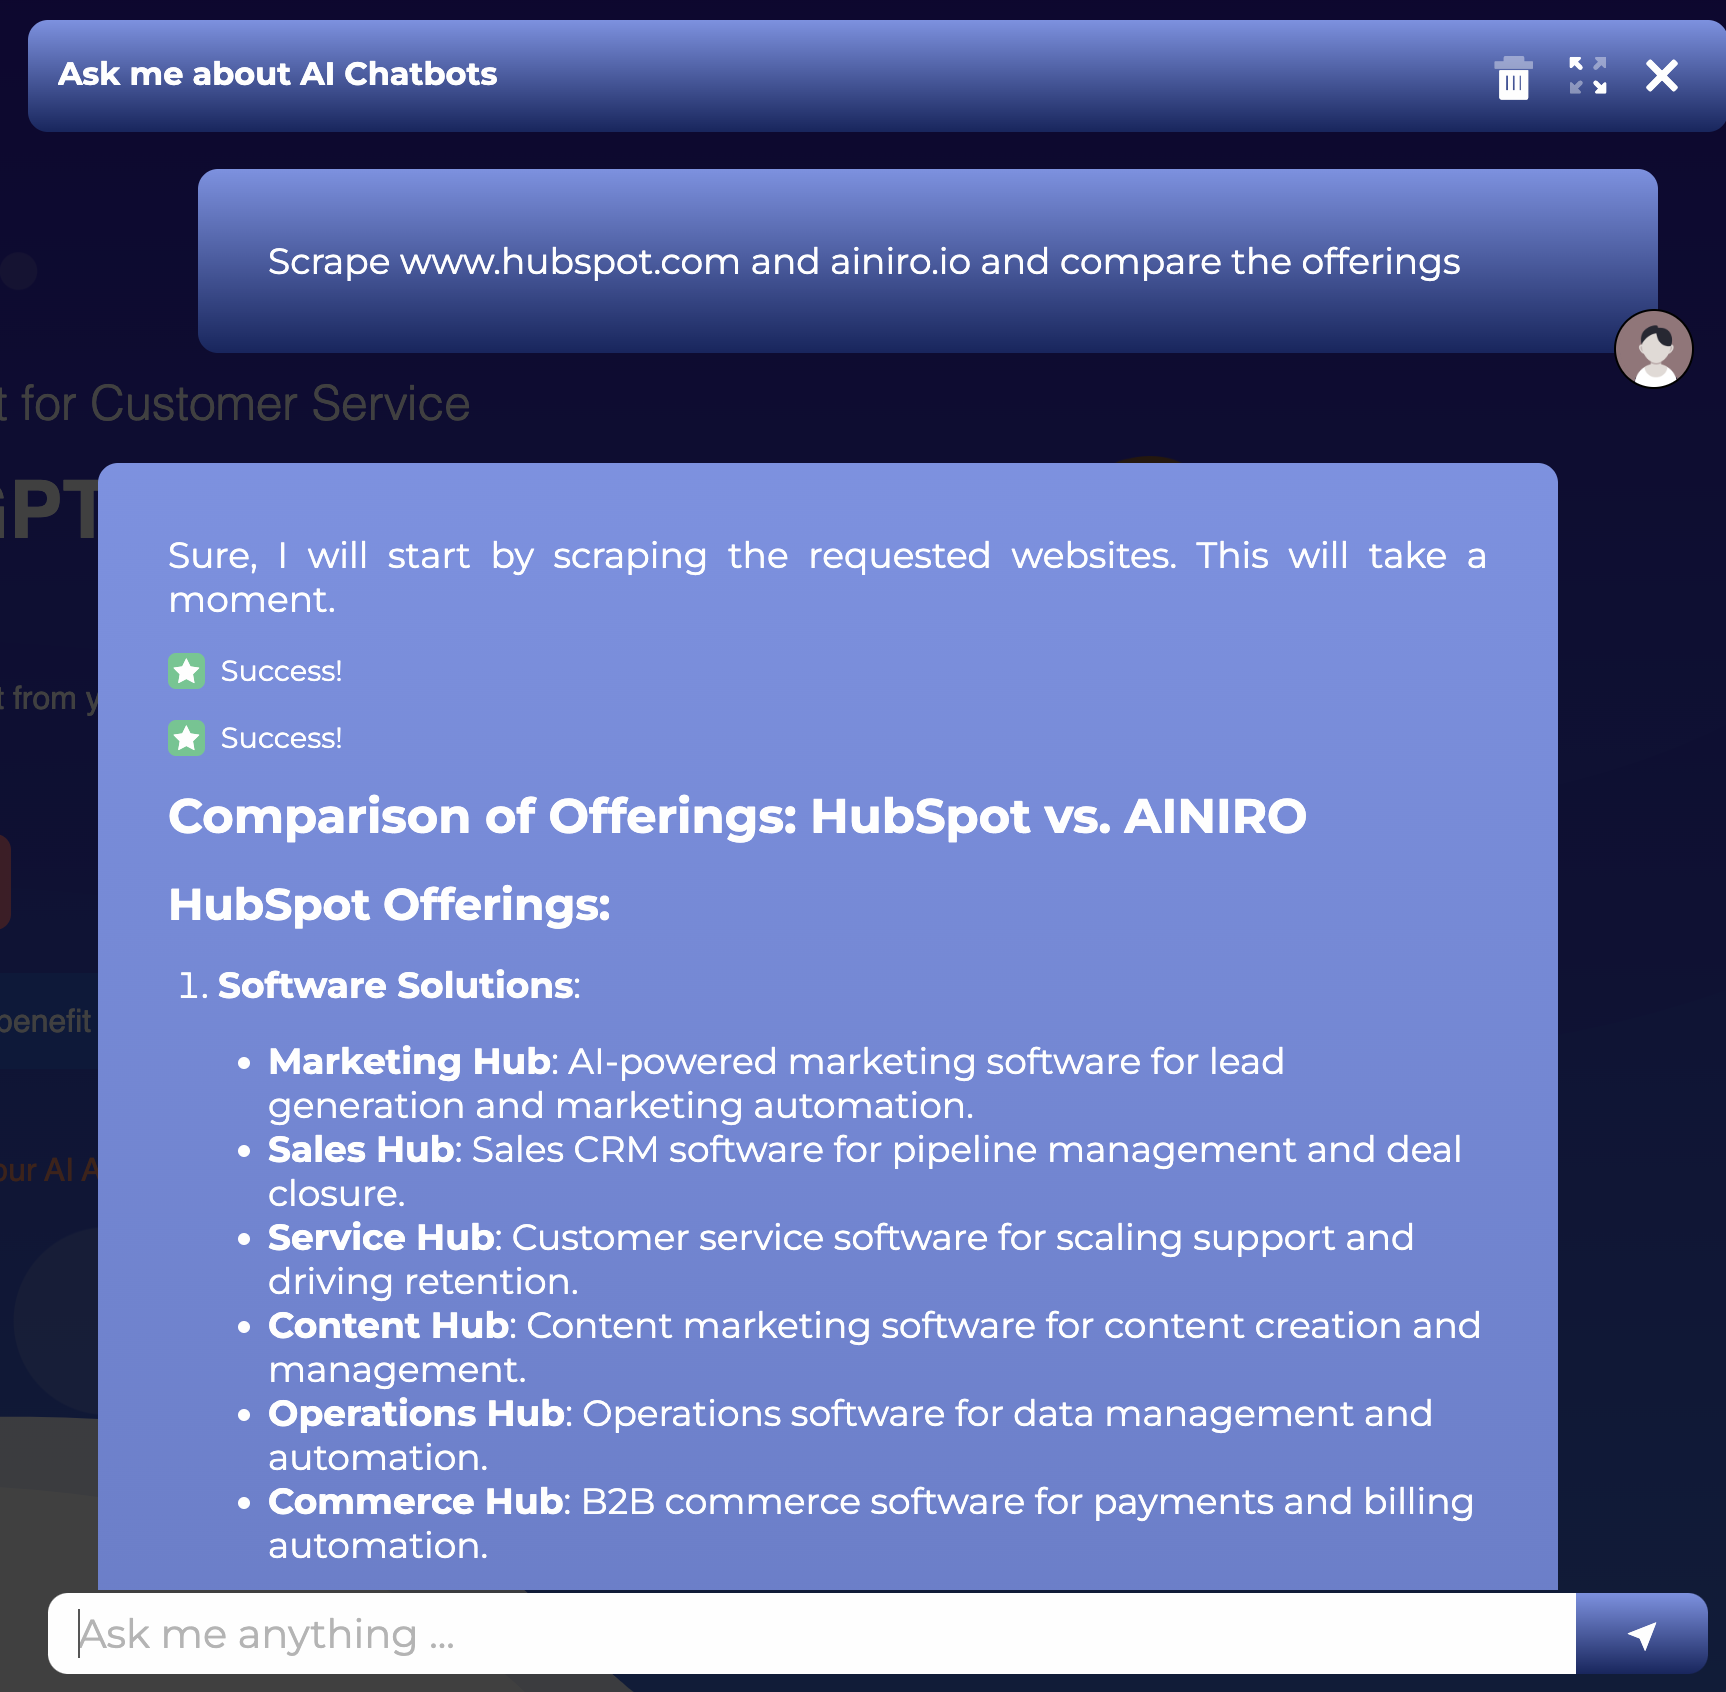 Using our AI functions to compare HubSpot to AINIRO